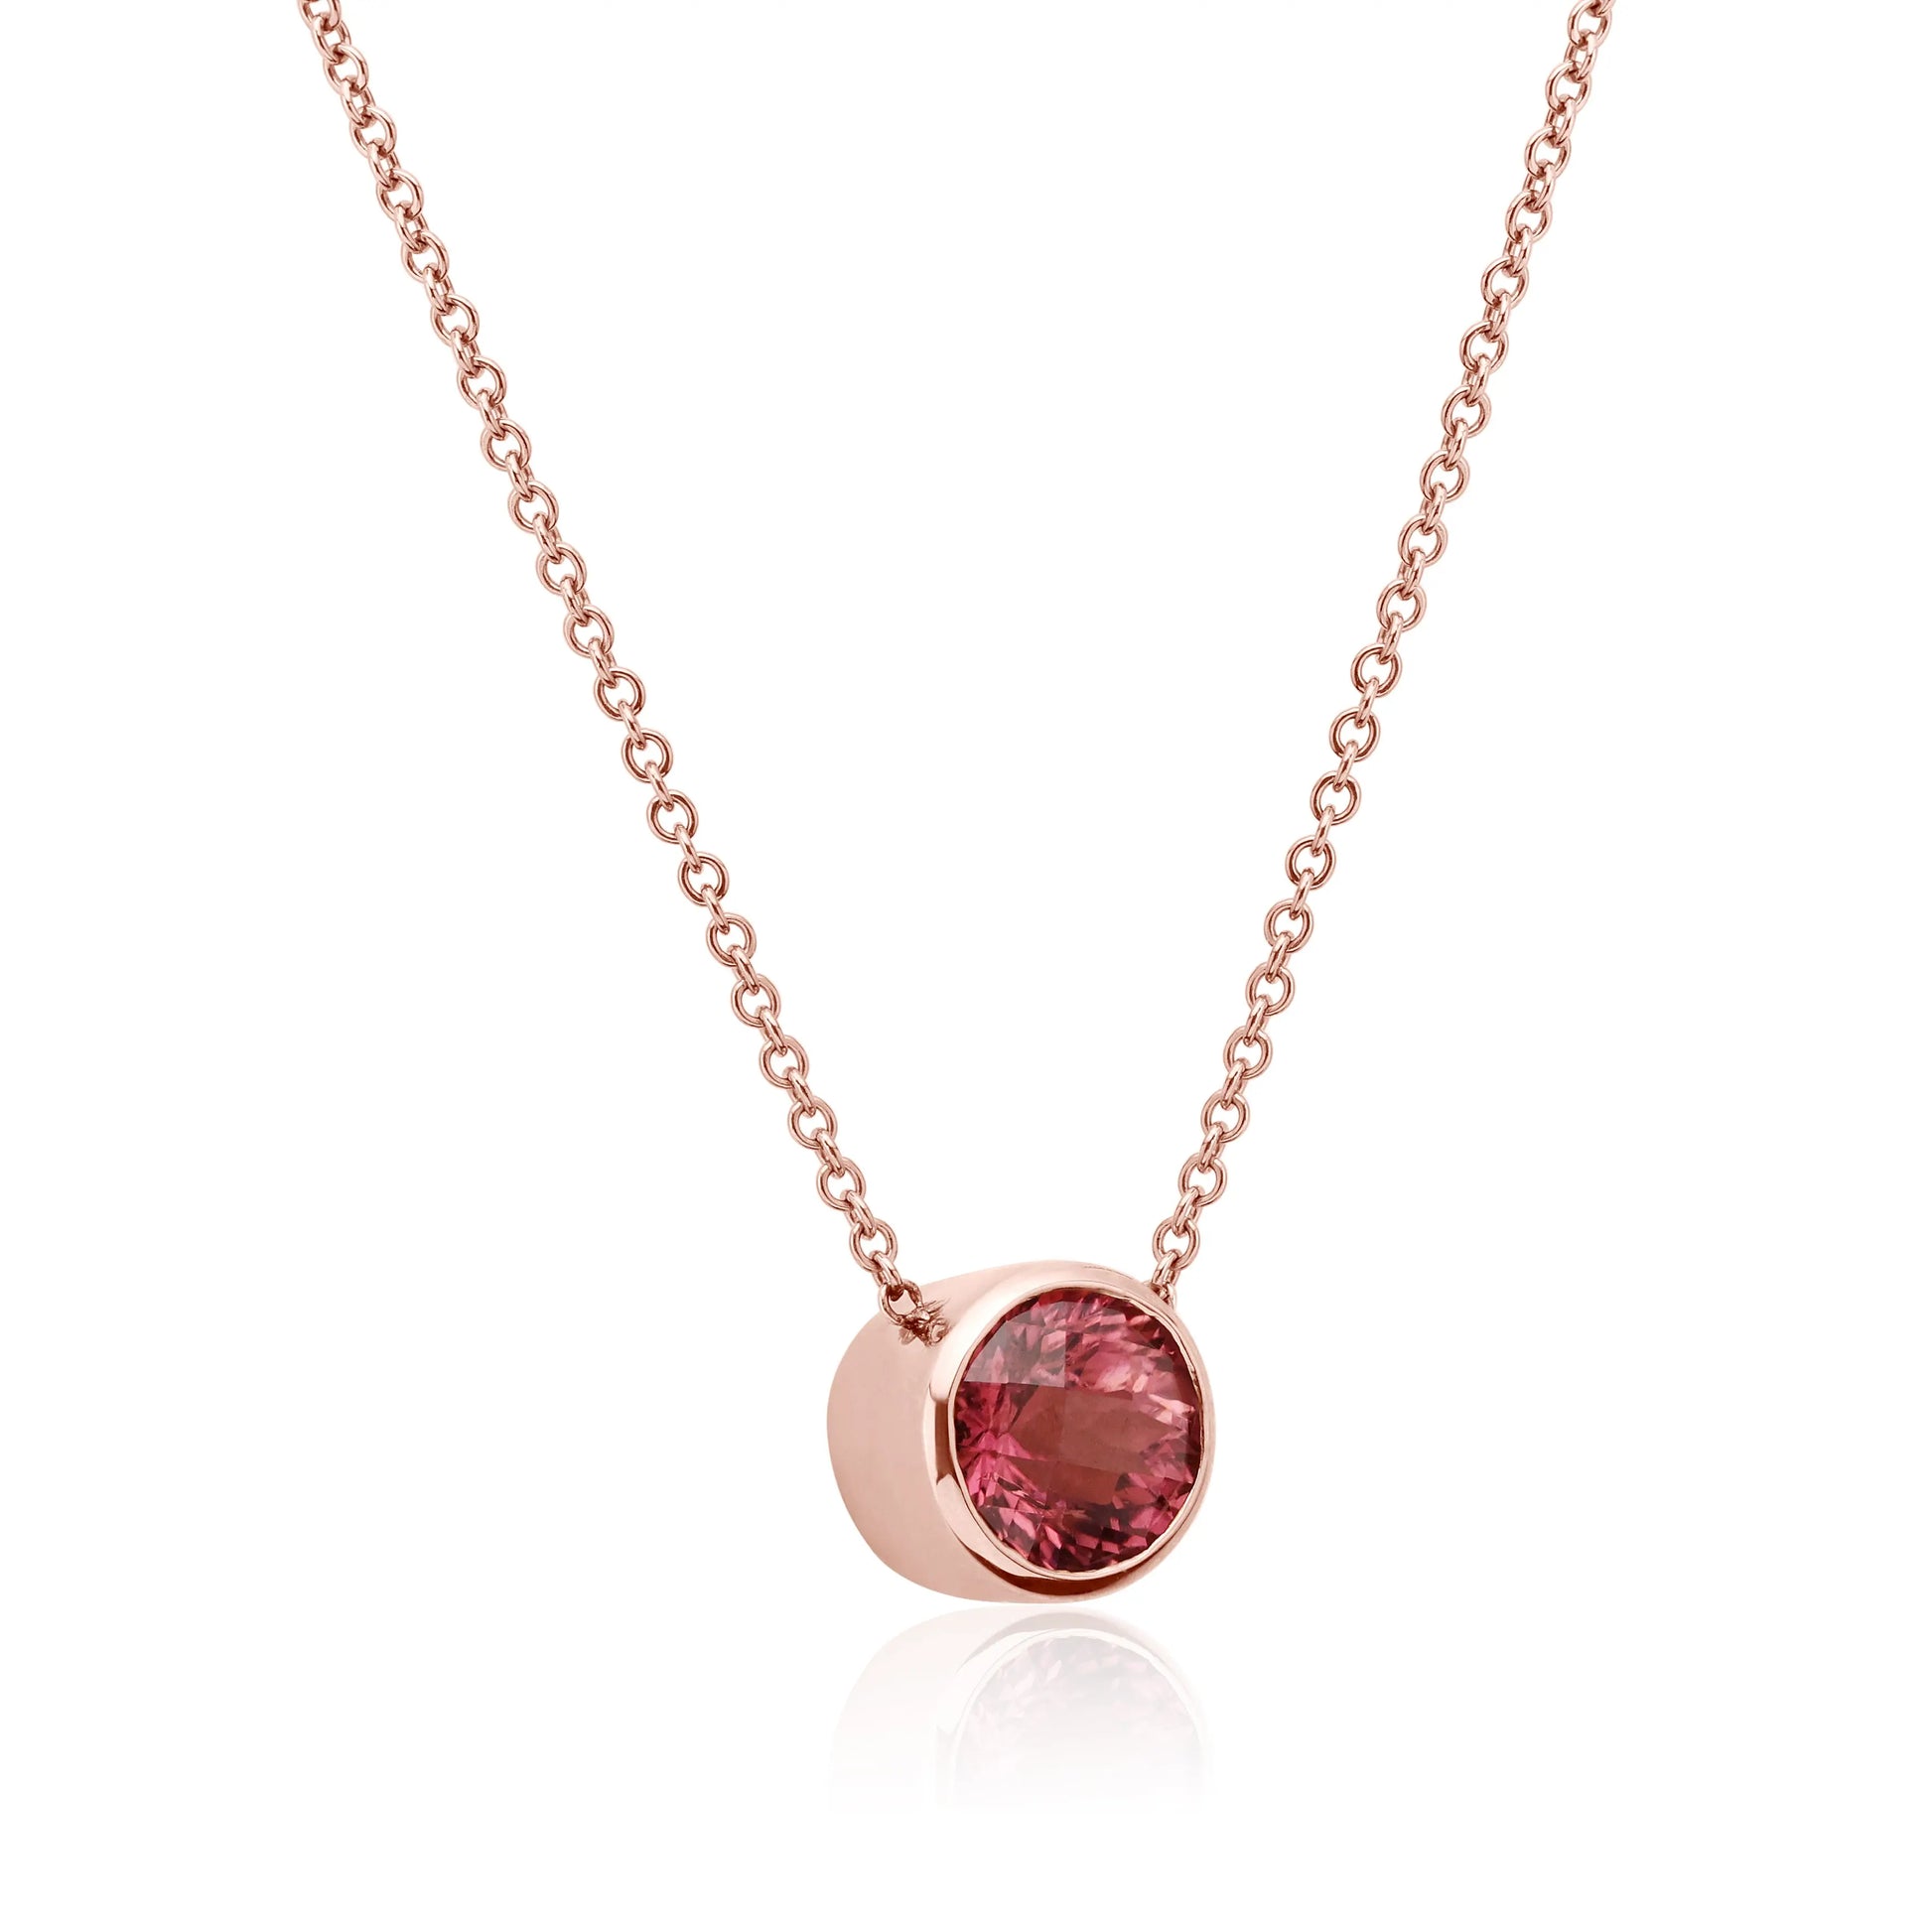 Rose Gold Necklaces Rose Gold Pink Tourmaline Necklace dansonjewelers Danson Jewelers 